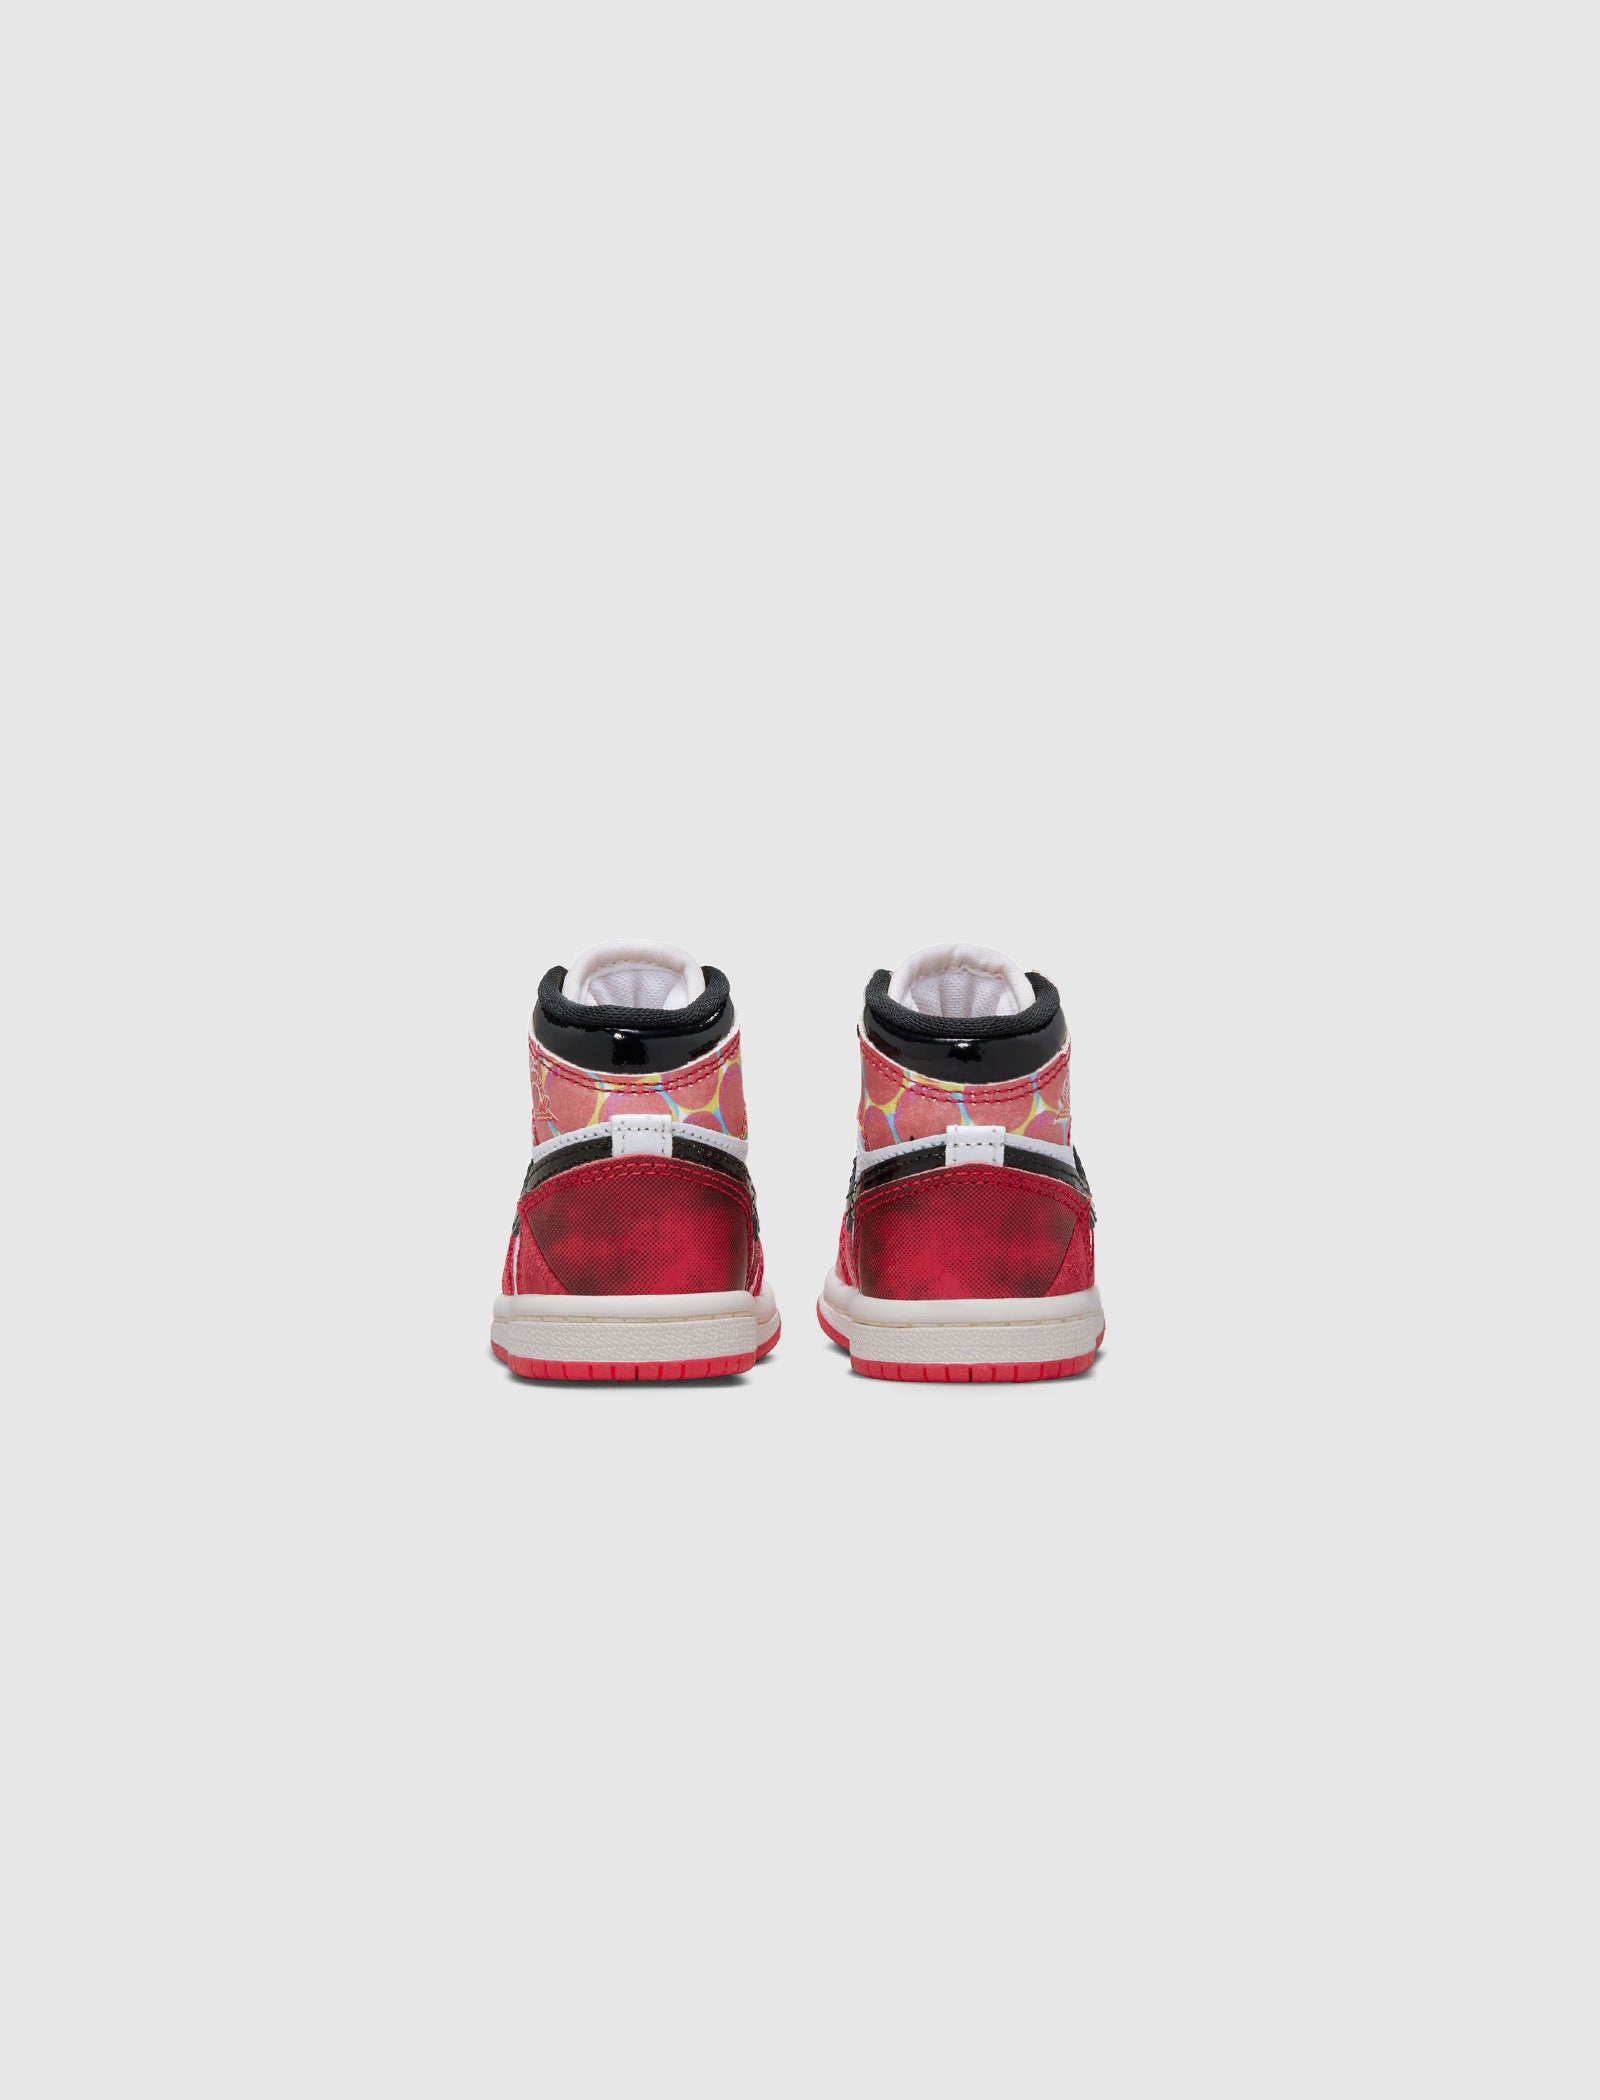 Air Jordan 1 Off White (SpiderVerse) Version , i made : r/Sneakers